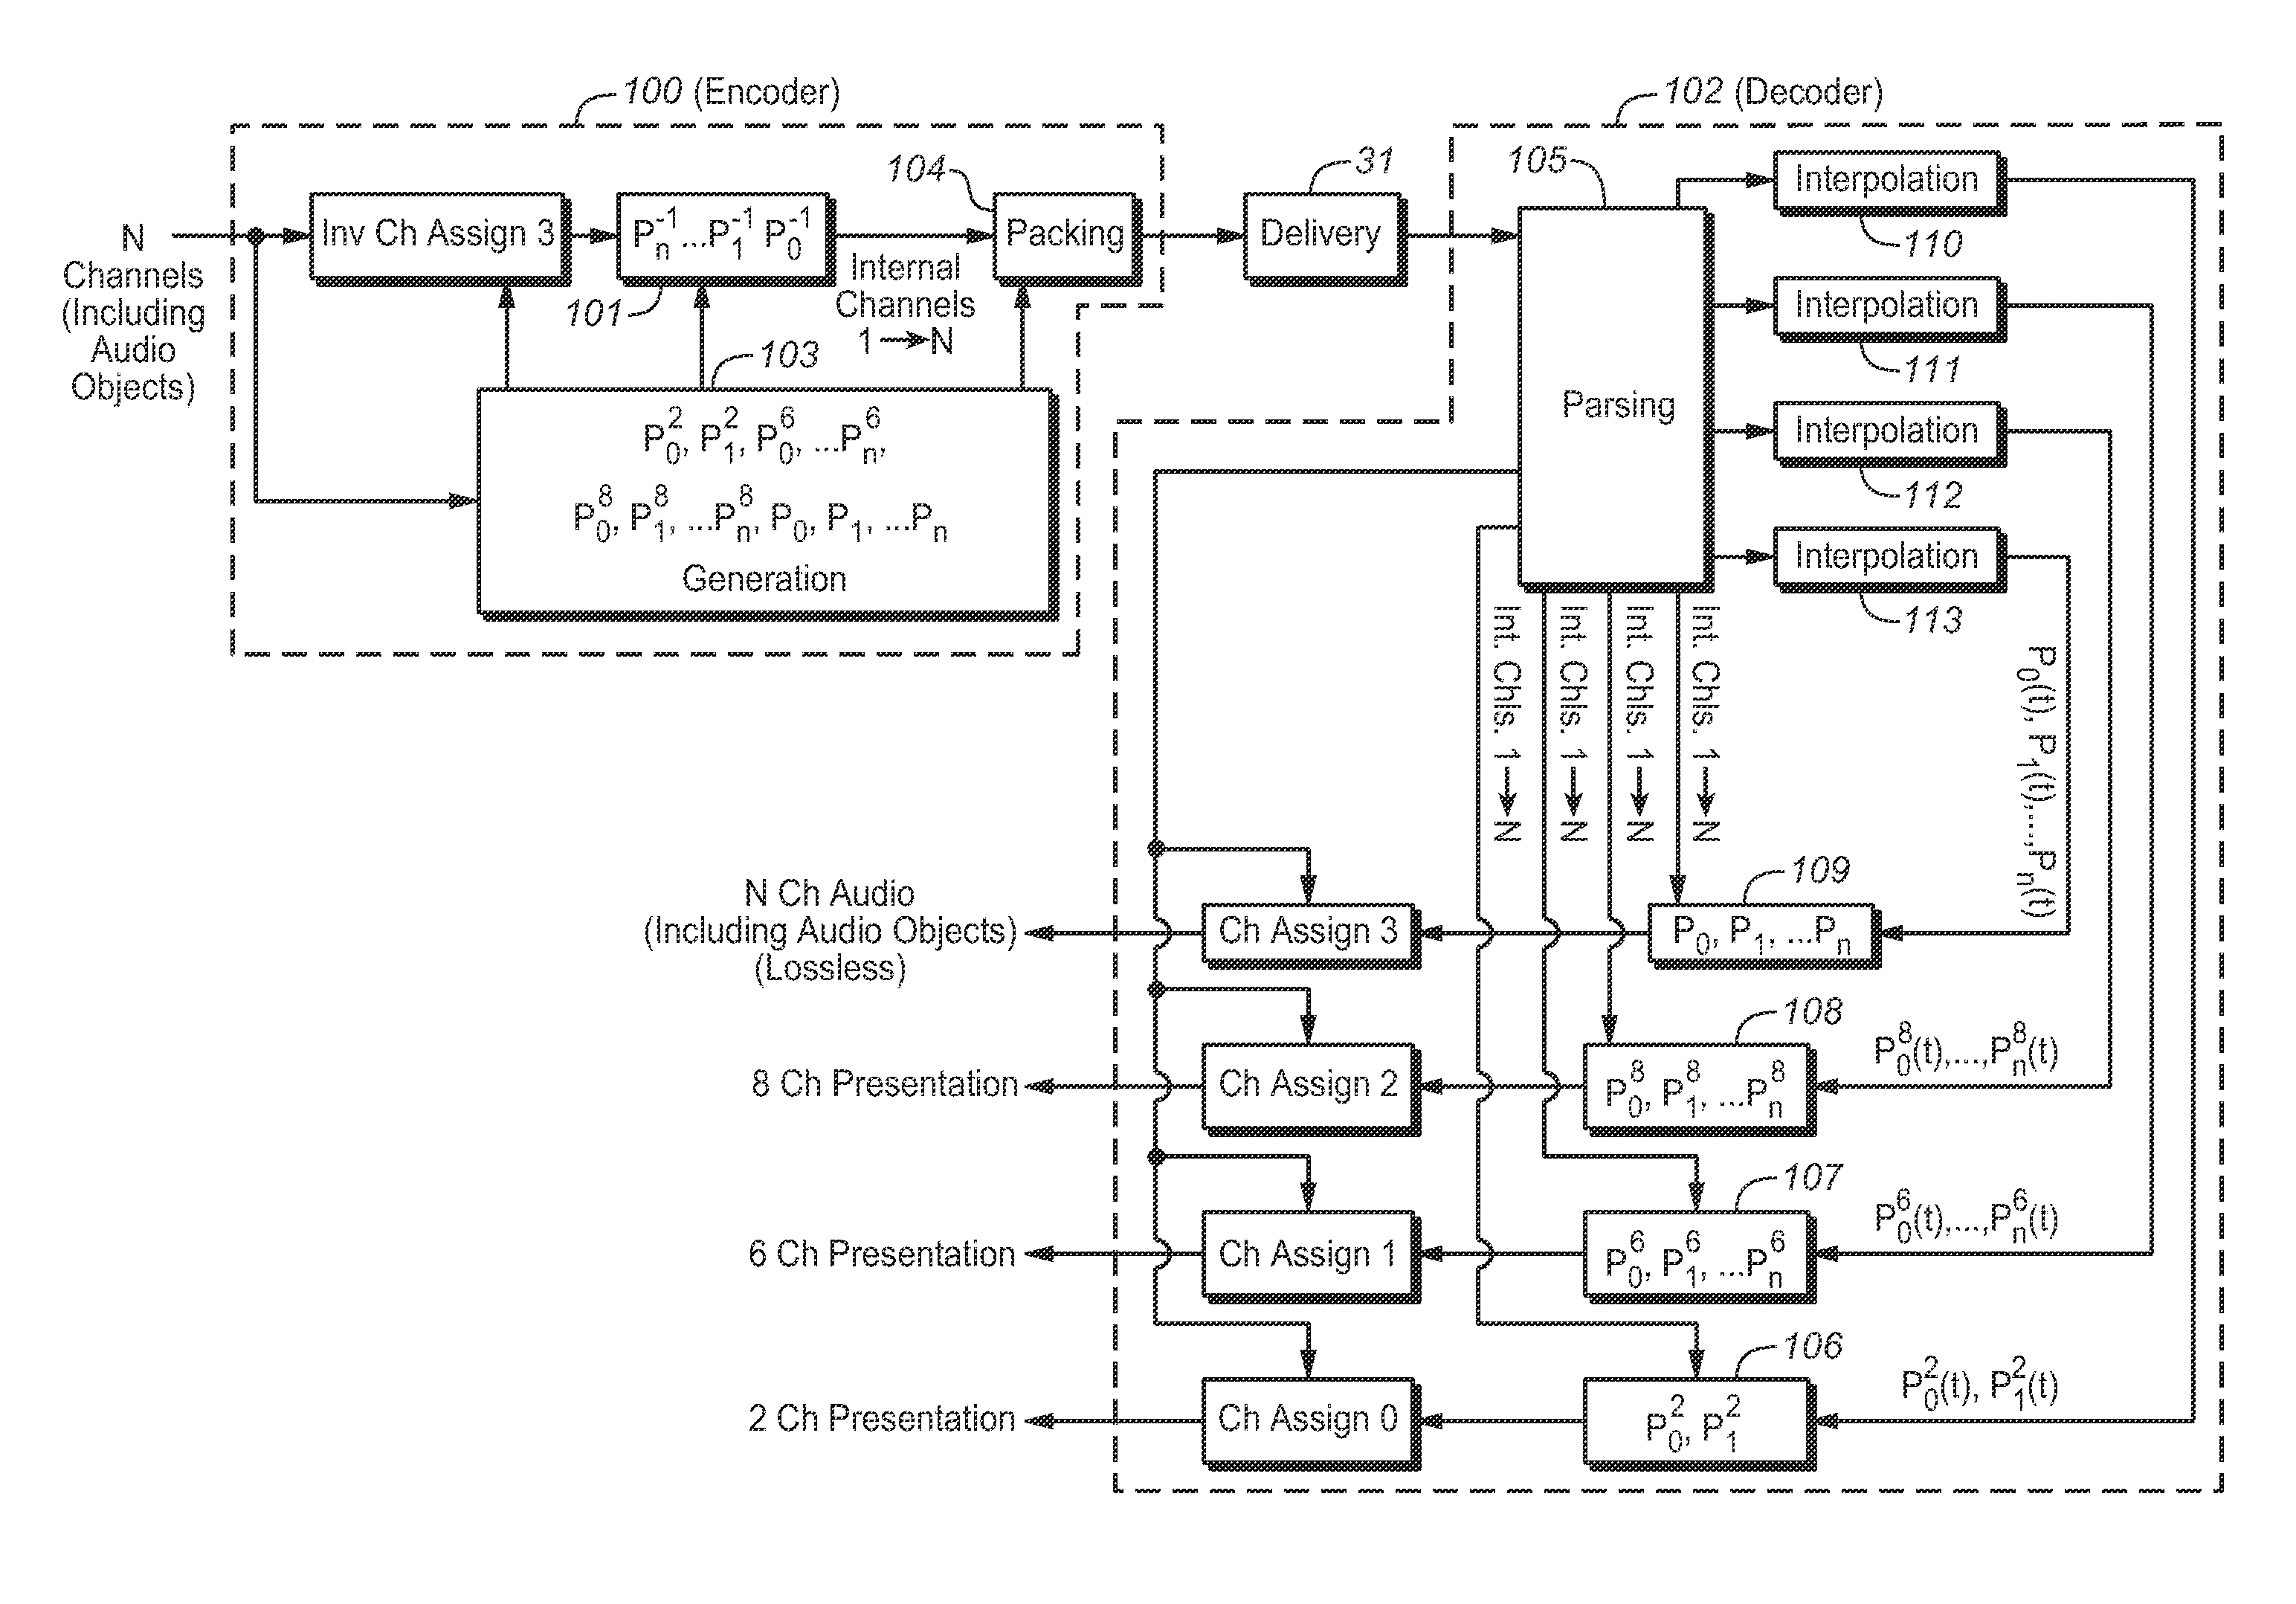 Rendering of multichannel audio using interpolated matrices